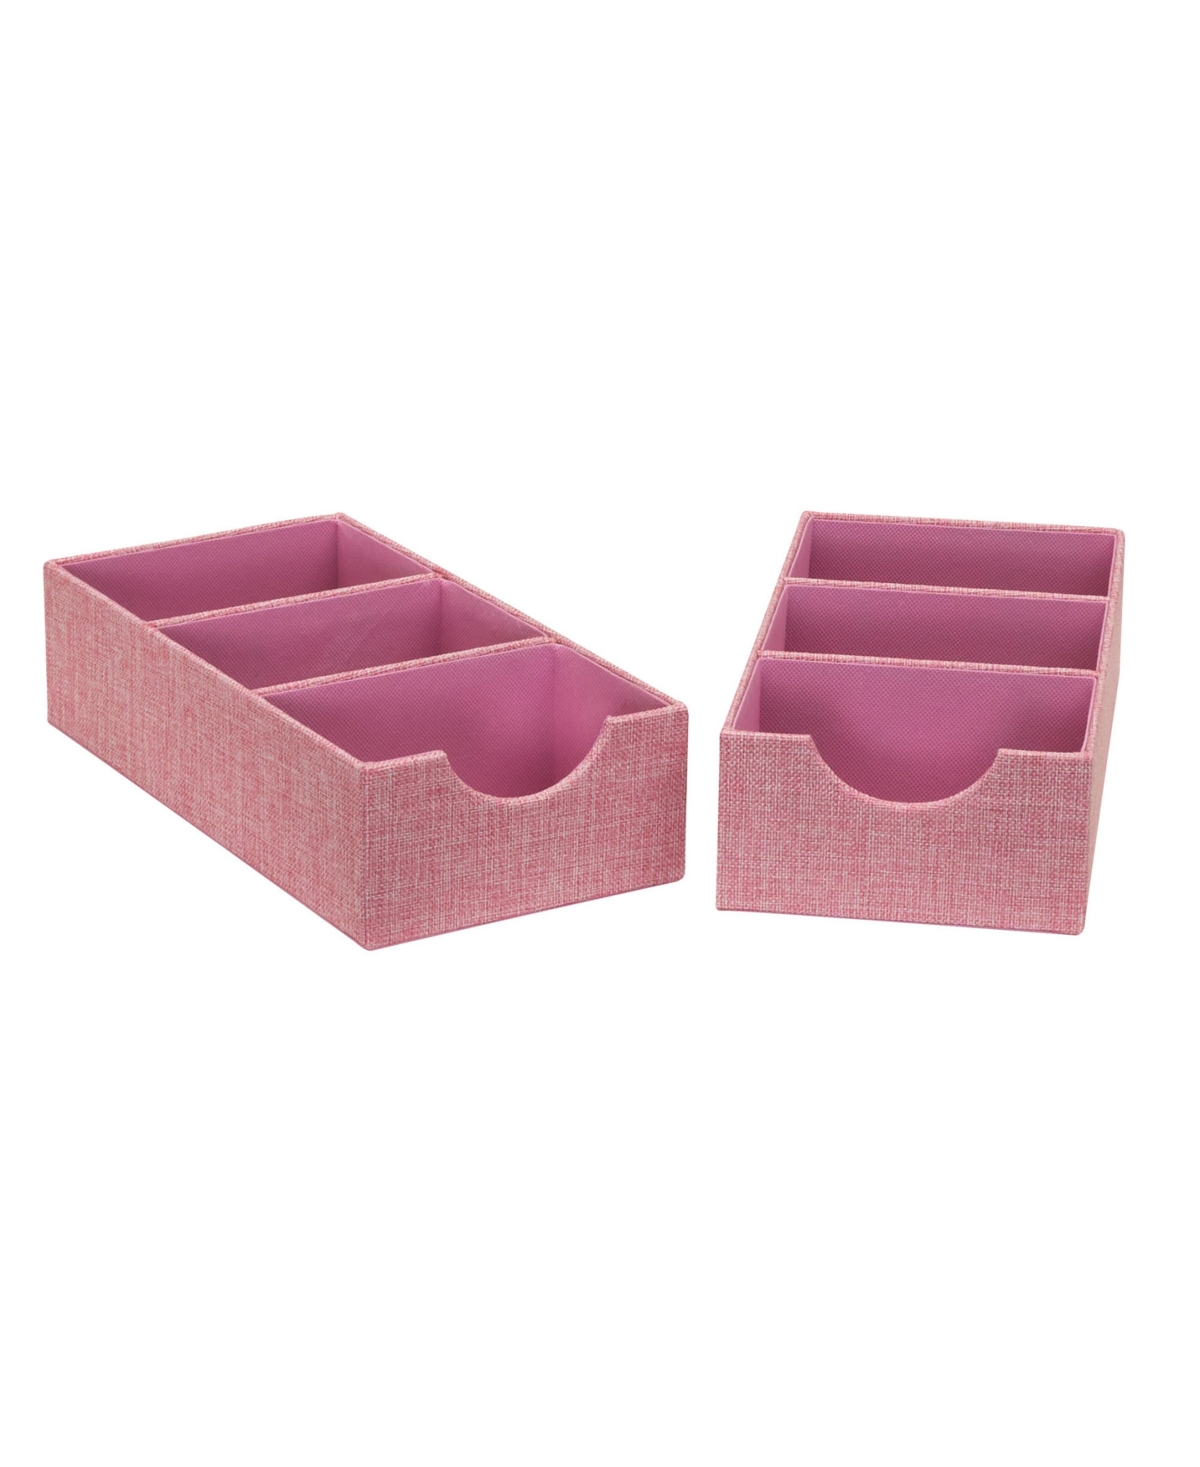 3-Compartment Drawer Organizers Pack of 2 - Pink